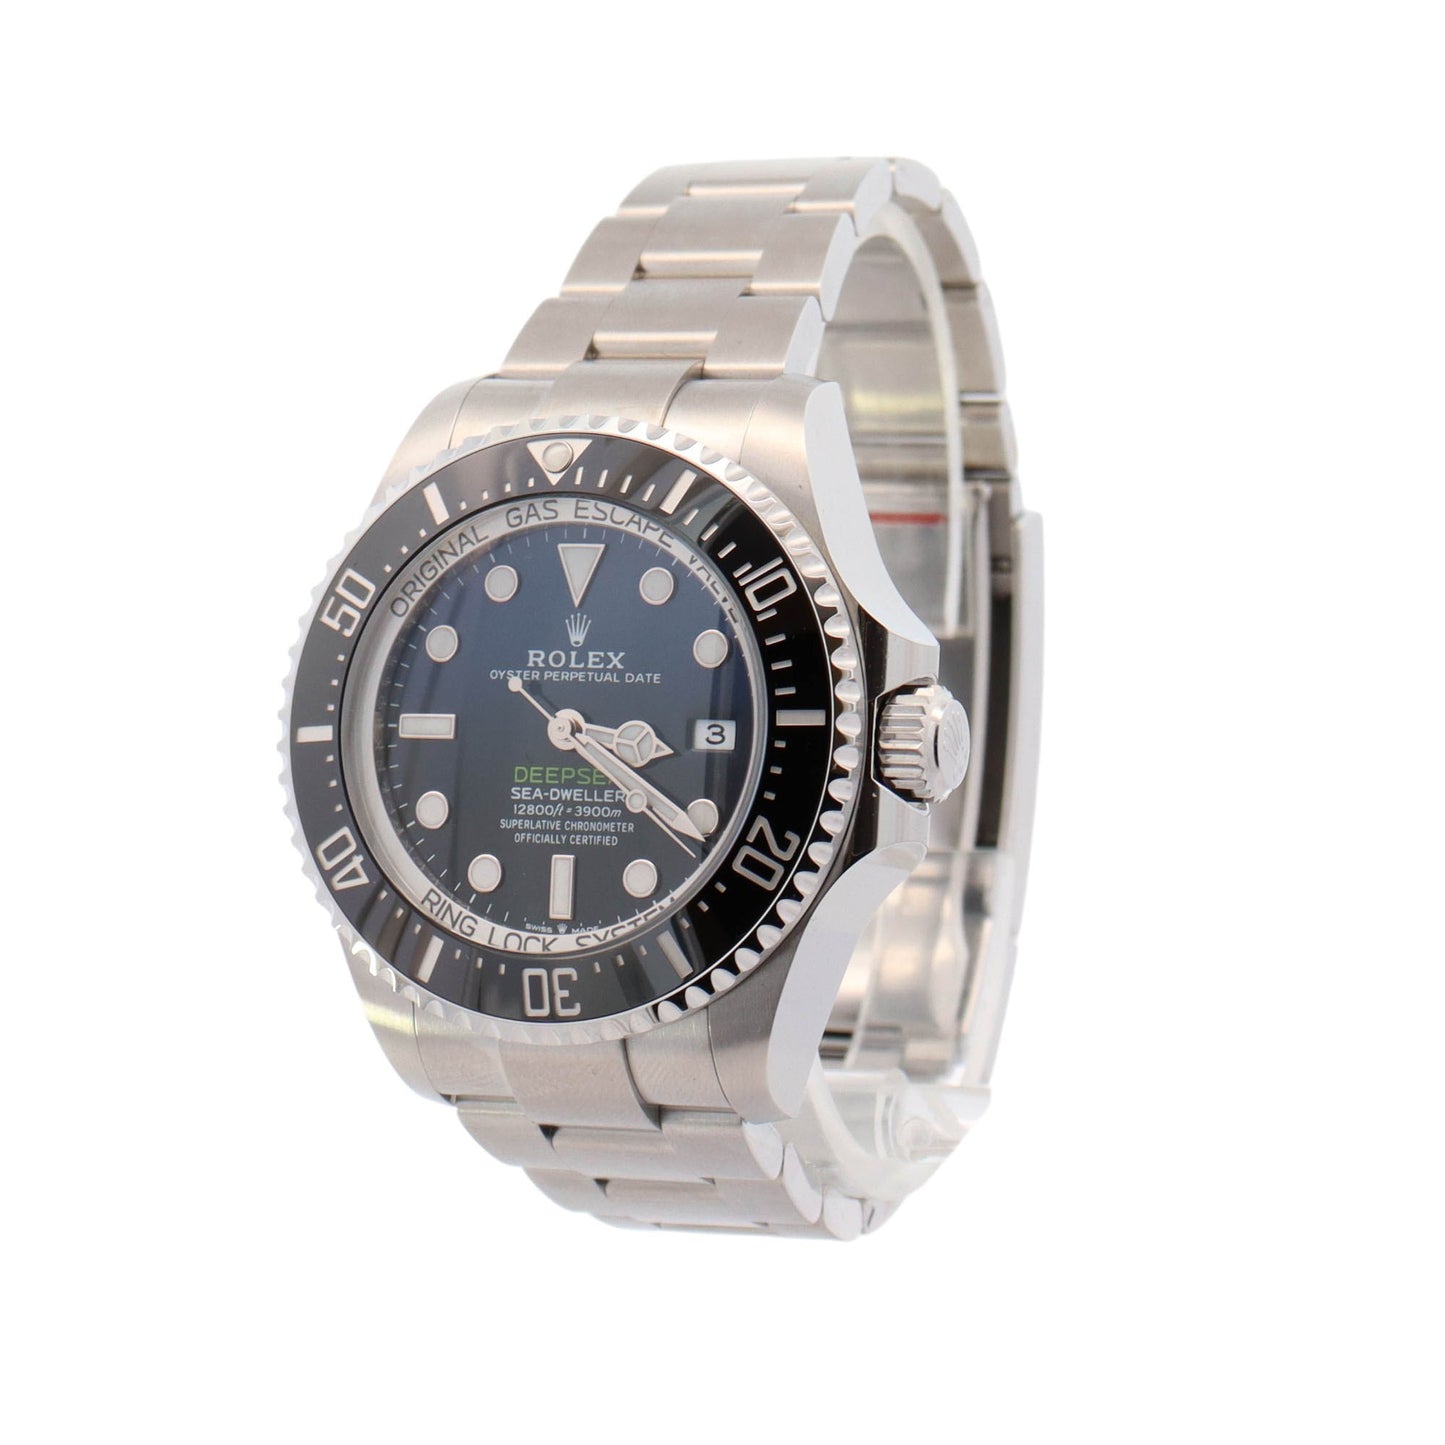 Rolex Sea-Dweller Deepsea "James Cameron" Stainless Steel 44mm Blue/Black Dot Dial Watch Reference# 136660